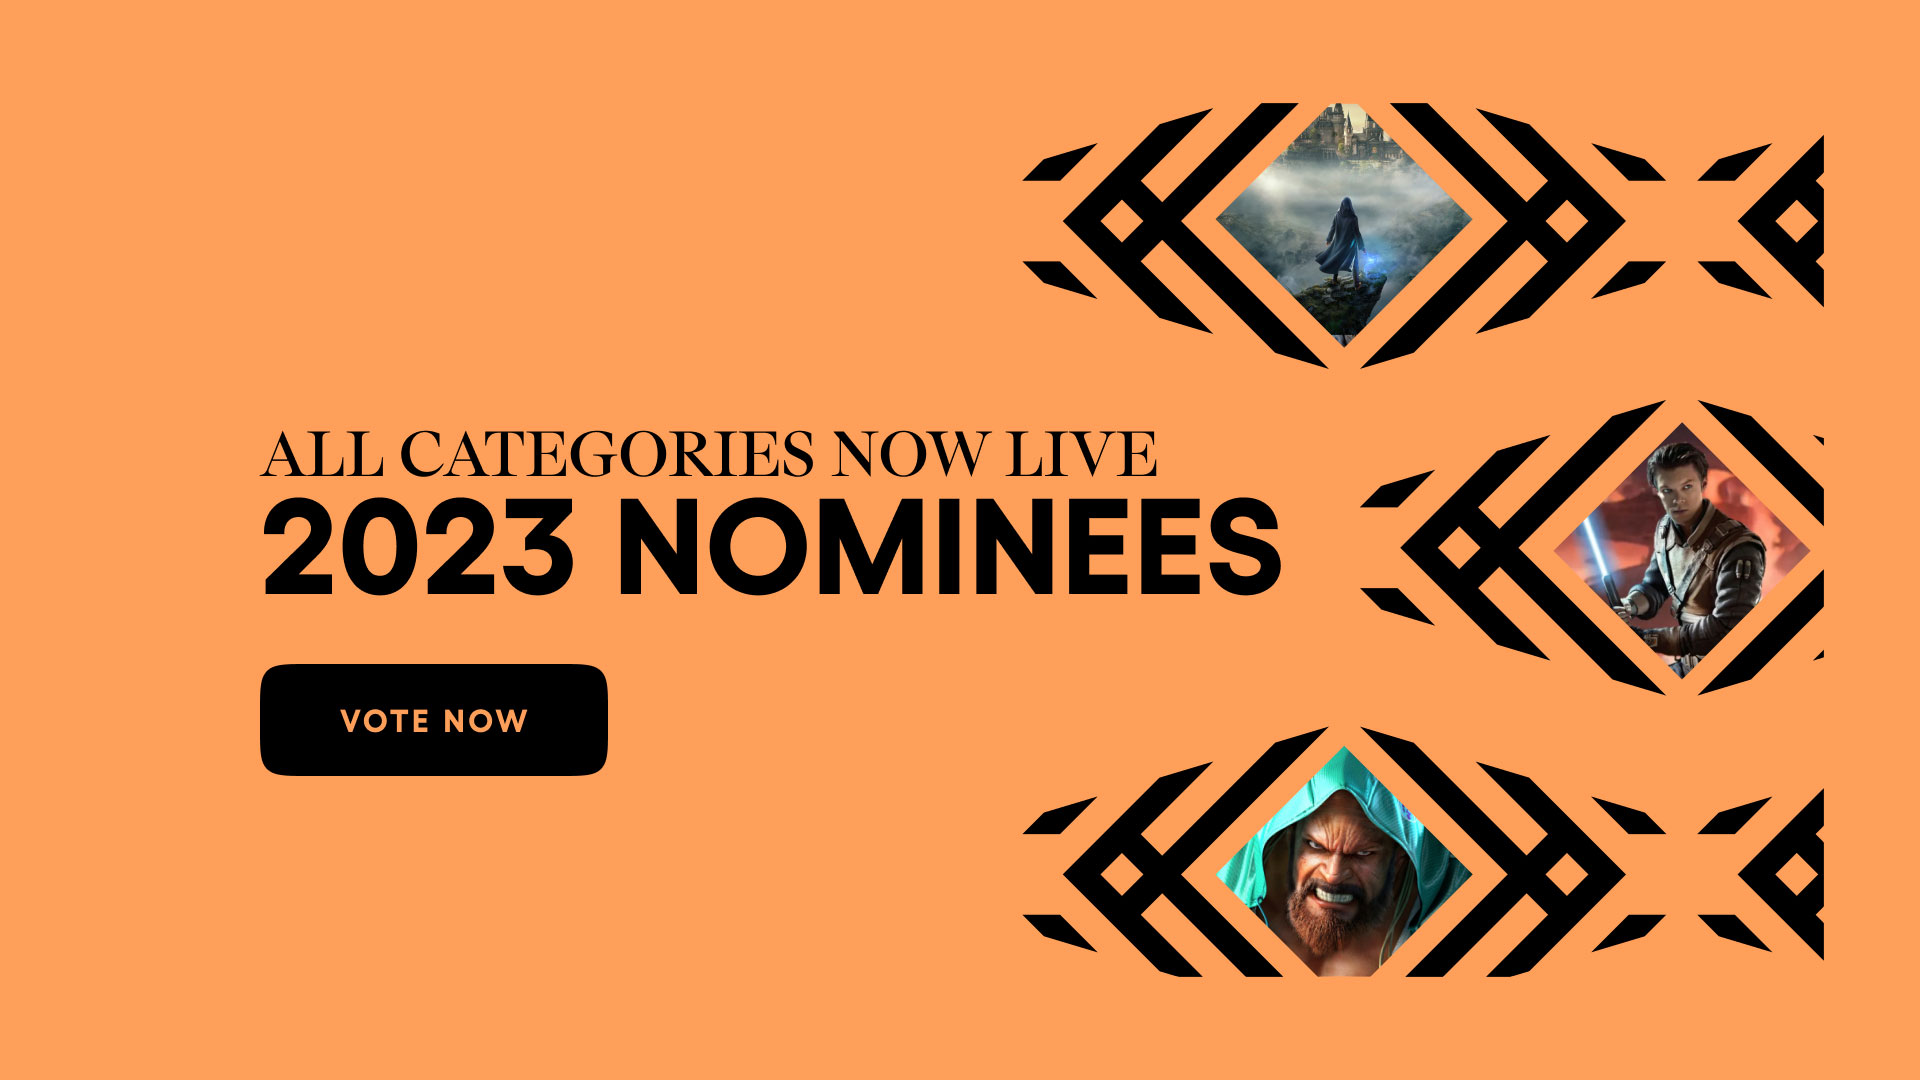 The Game Awards 2023 nominees have been announced